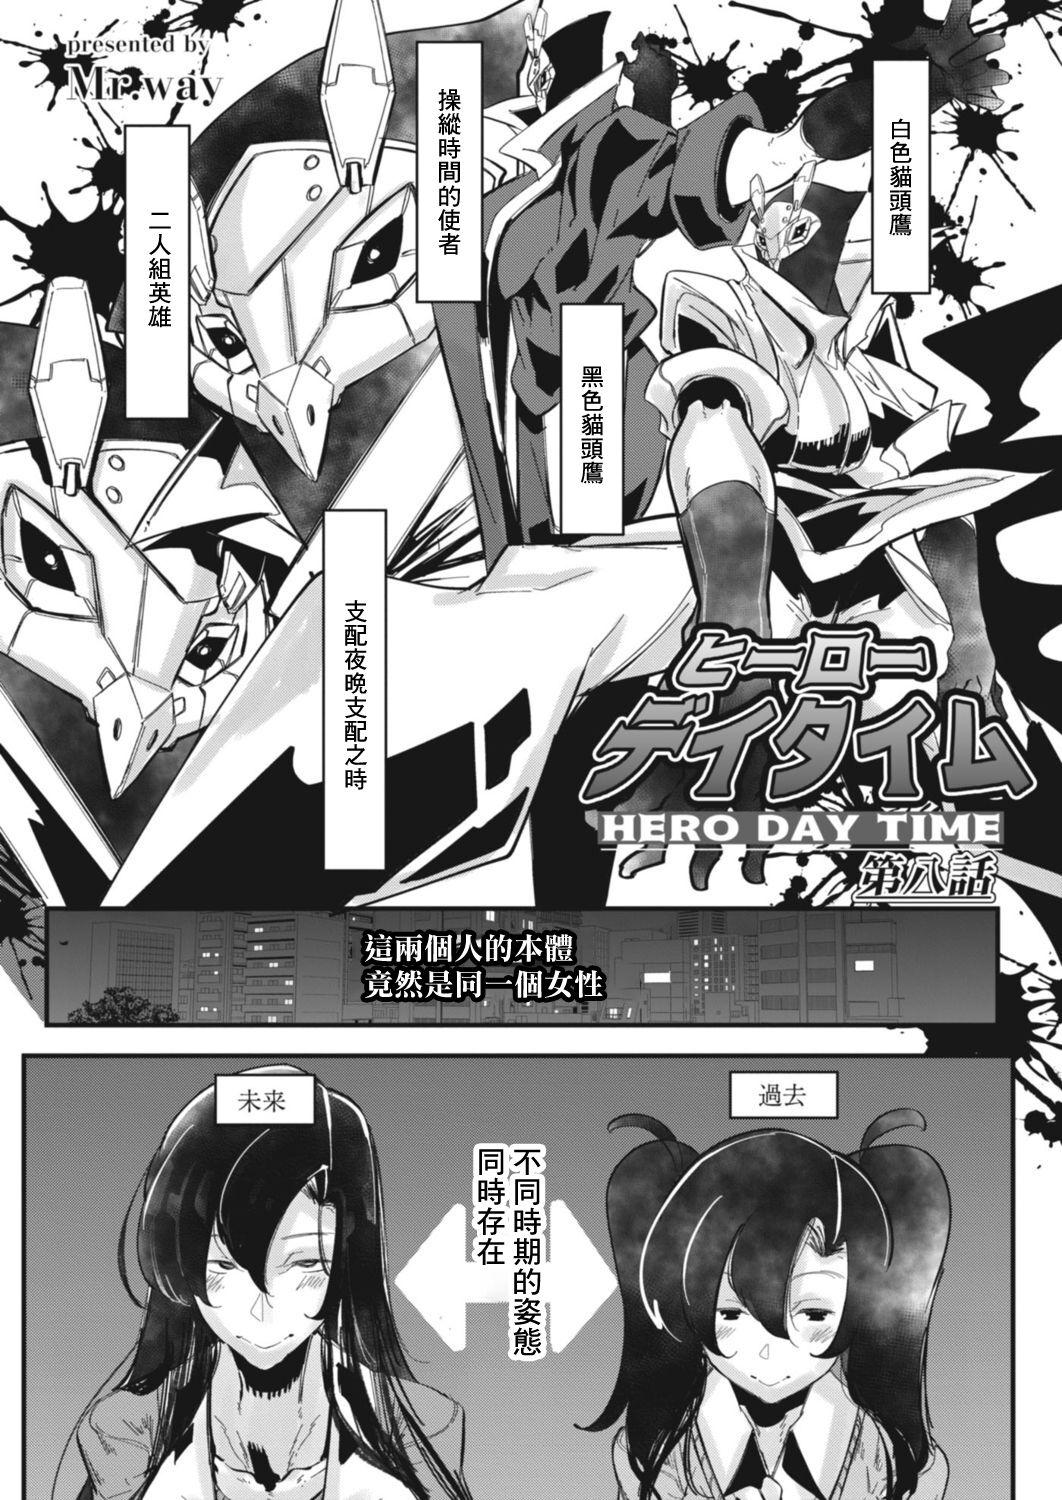 Club HERO DAY TIME Ch. 8 Gay Cut - Page 1